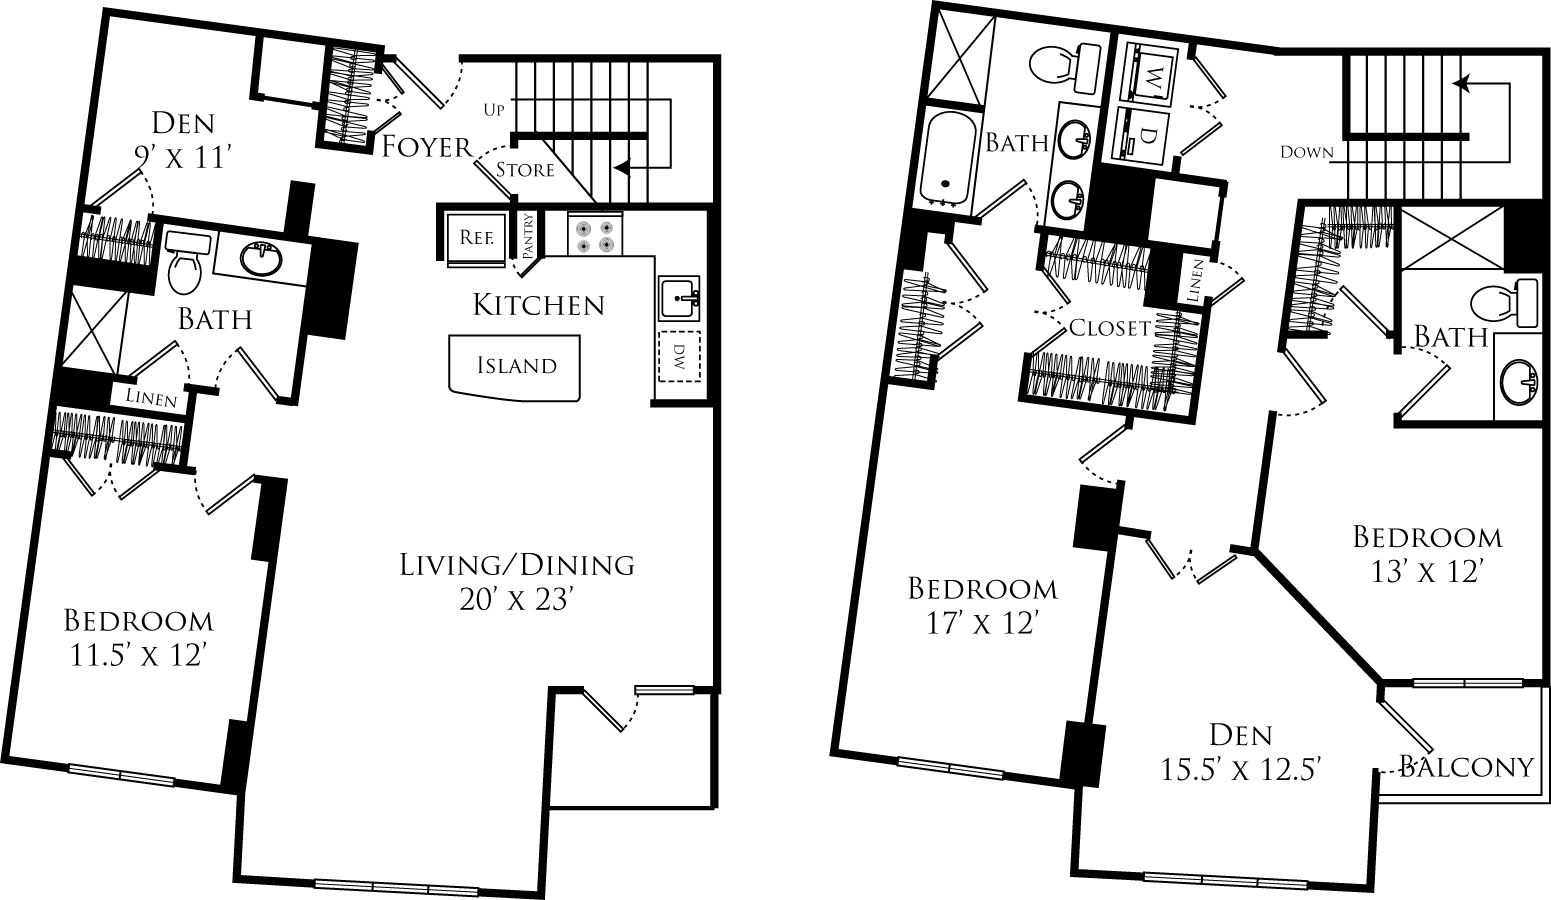 D3A + den floor plan is 3 beds, 3 baths and is 2300 square feet